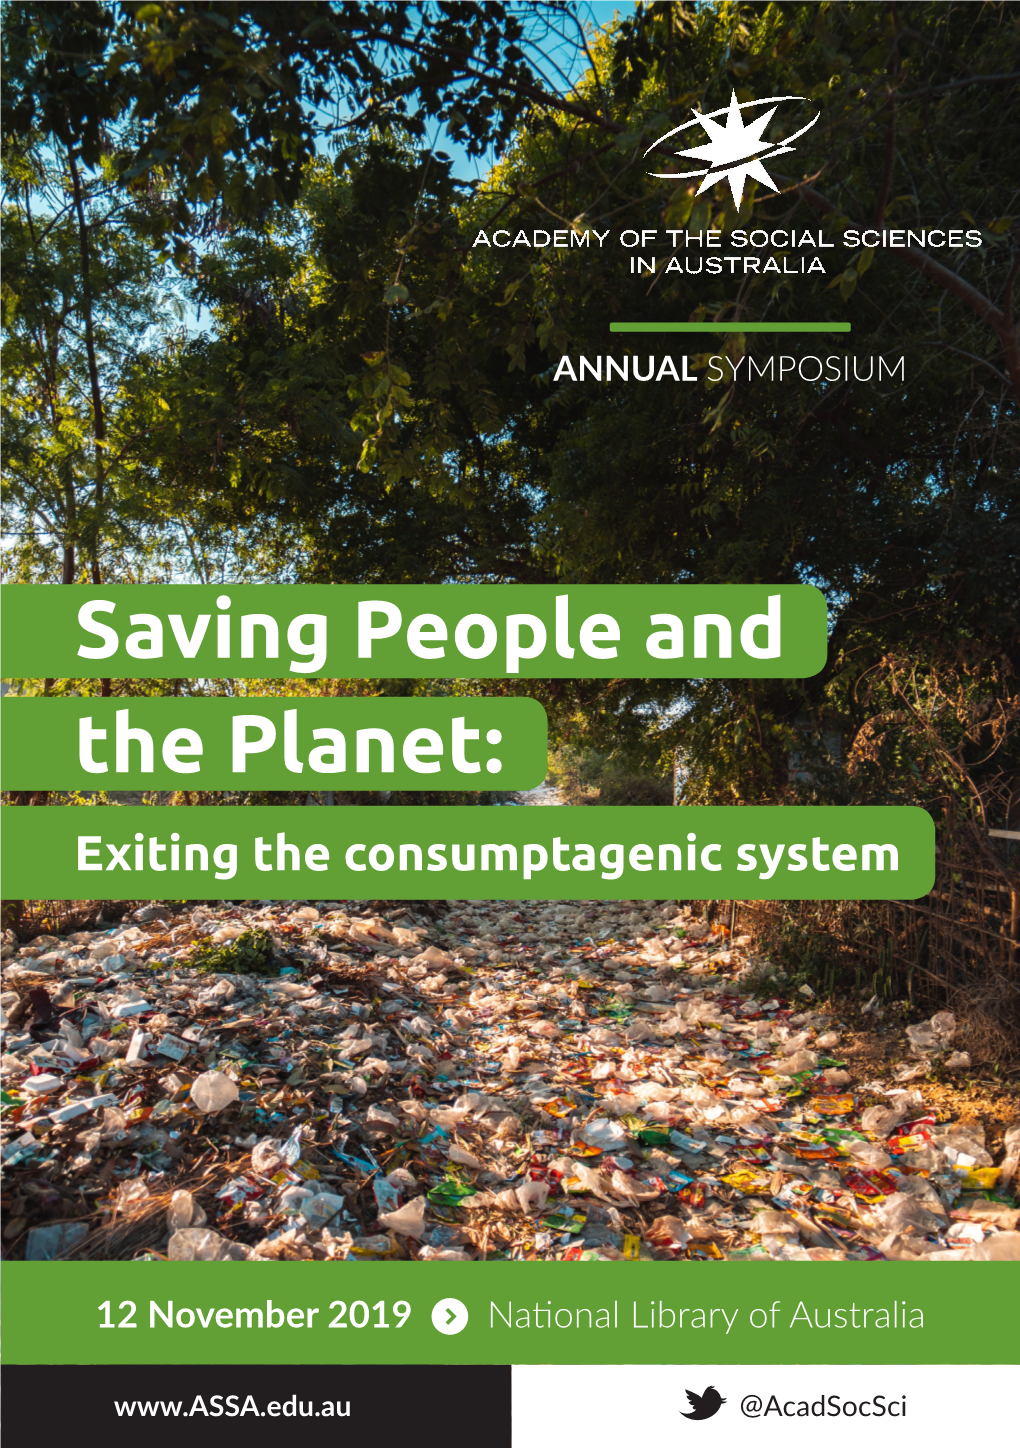 Saving People and the Planet: Exiting the Consumptagenic System